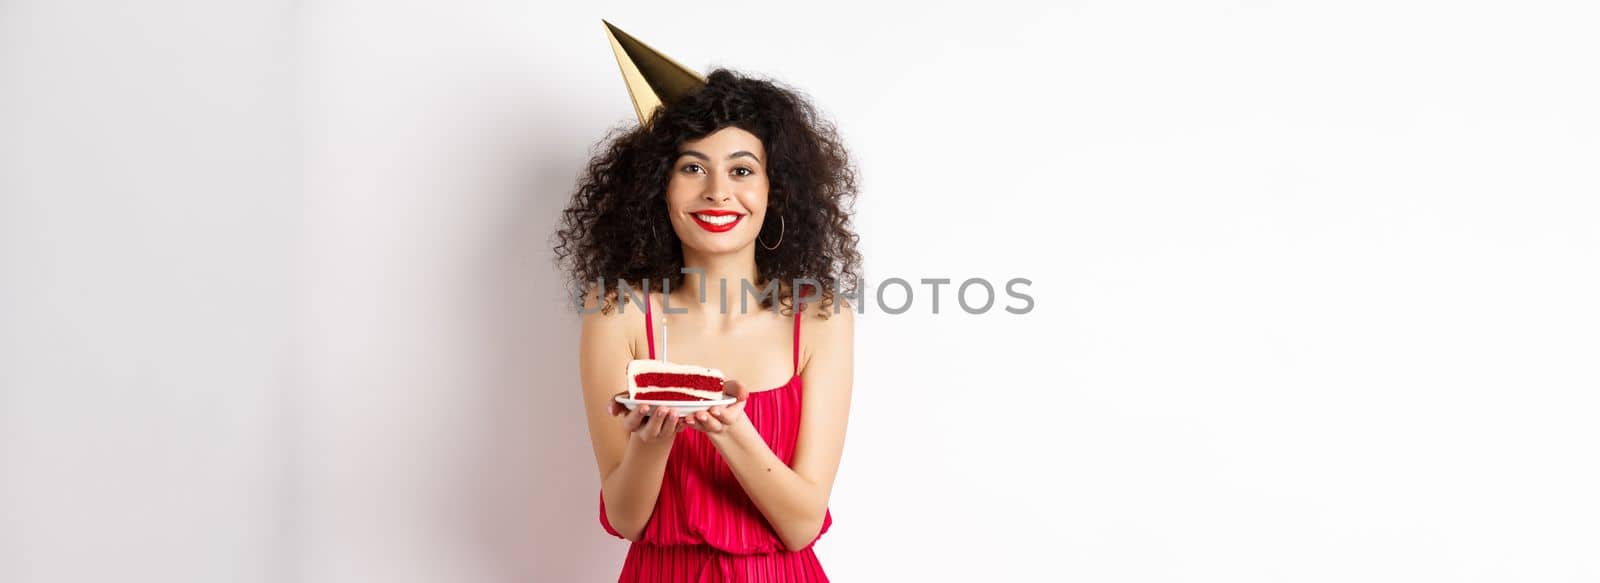 Beautiful woman in red dress, wearing party hat and celebrating birthday, holding b-day cake and making wish, smiling at camera, standing on white background.